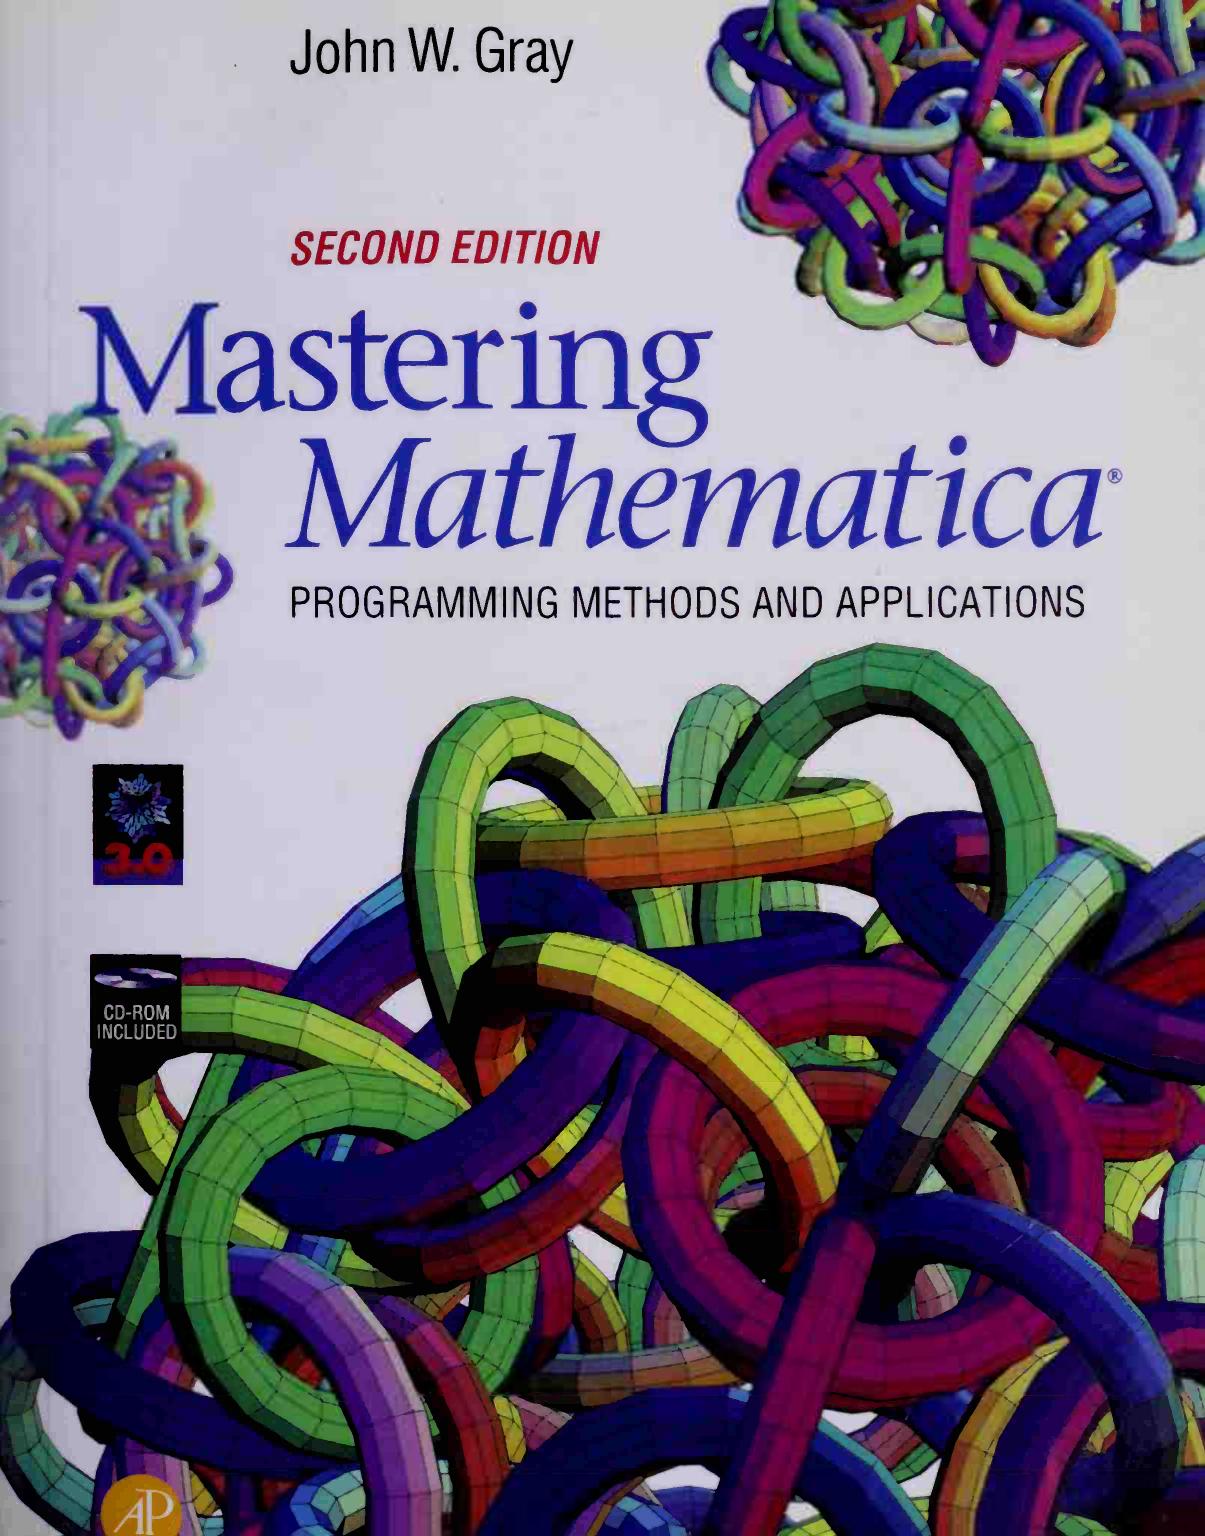 Mastering Mathematica®: Programming Methods and Applications - Second Edition